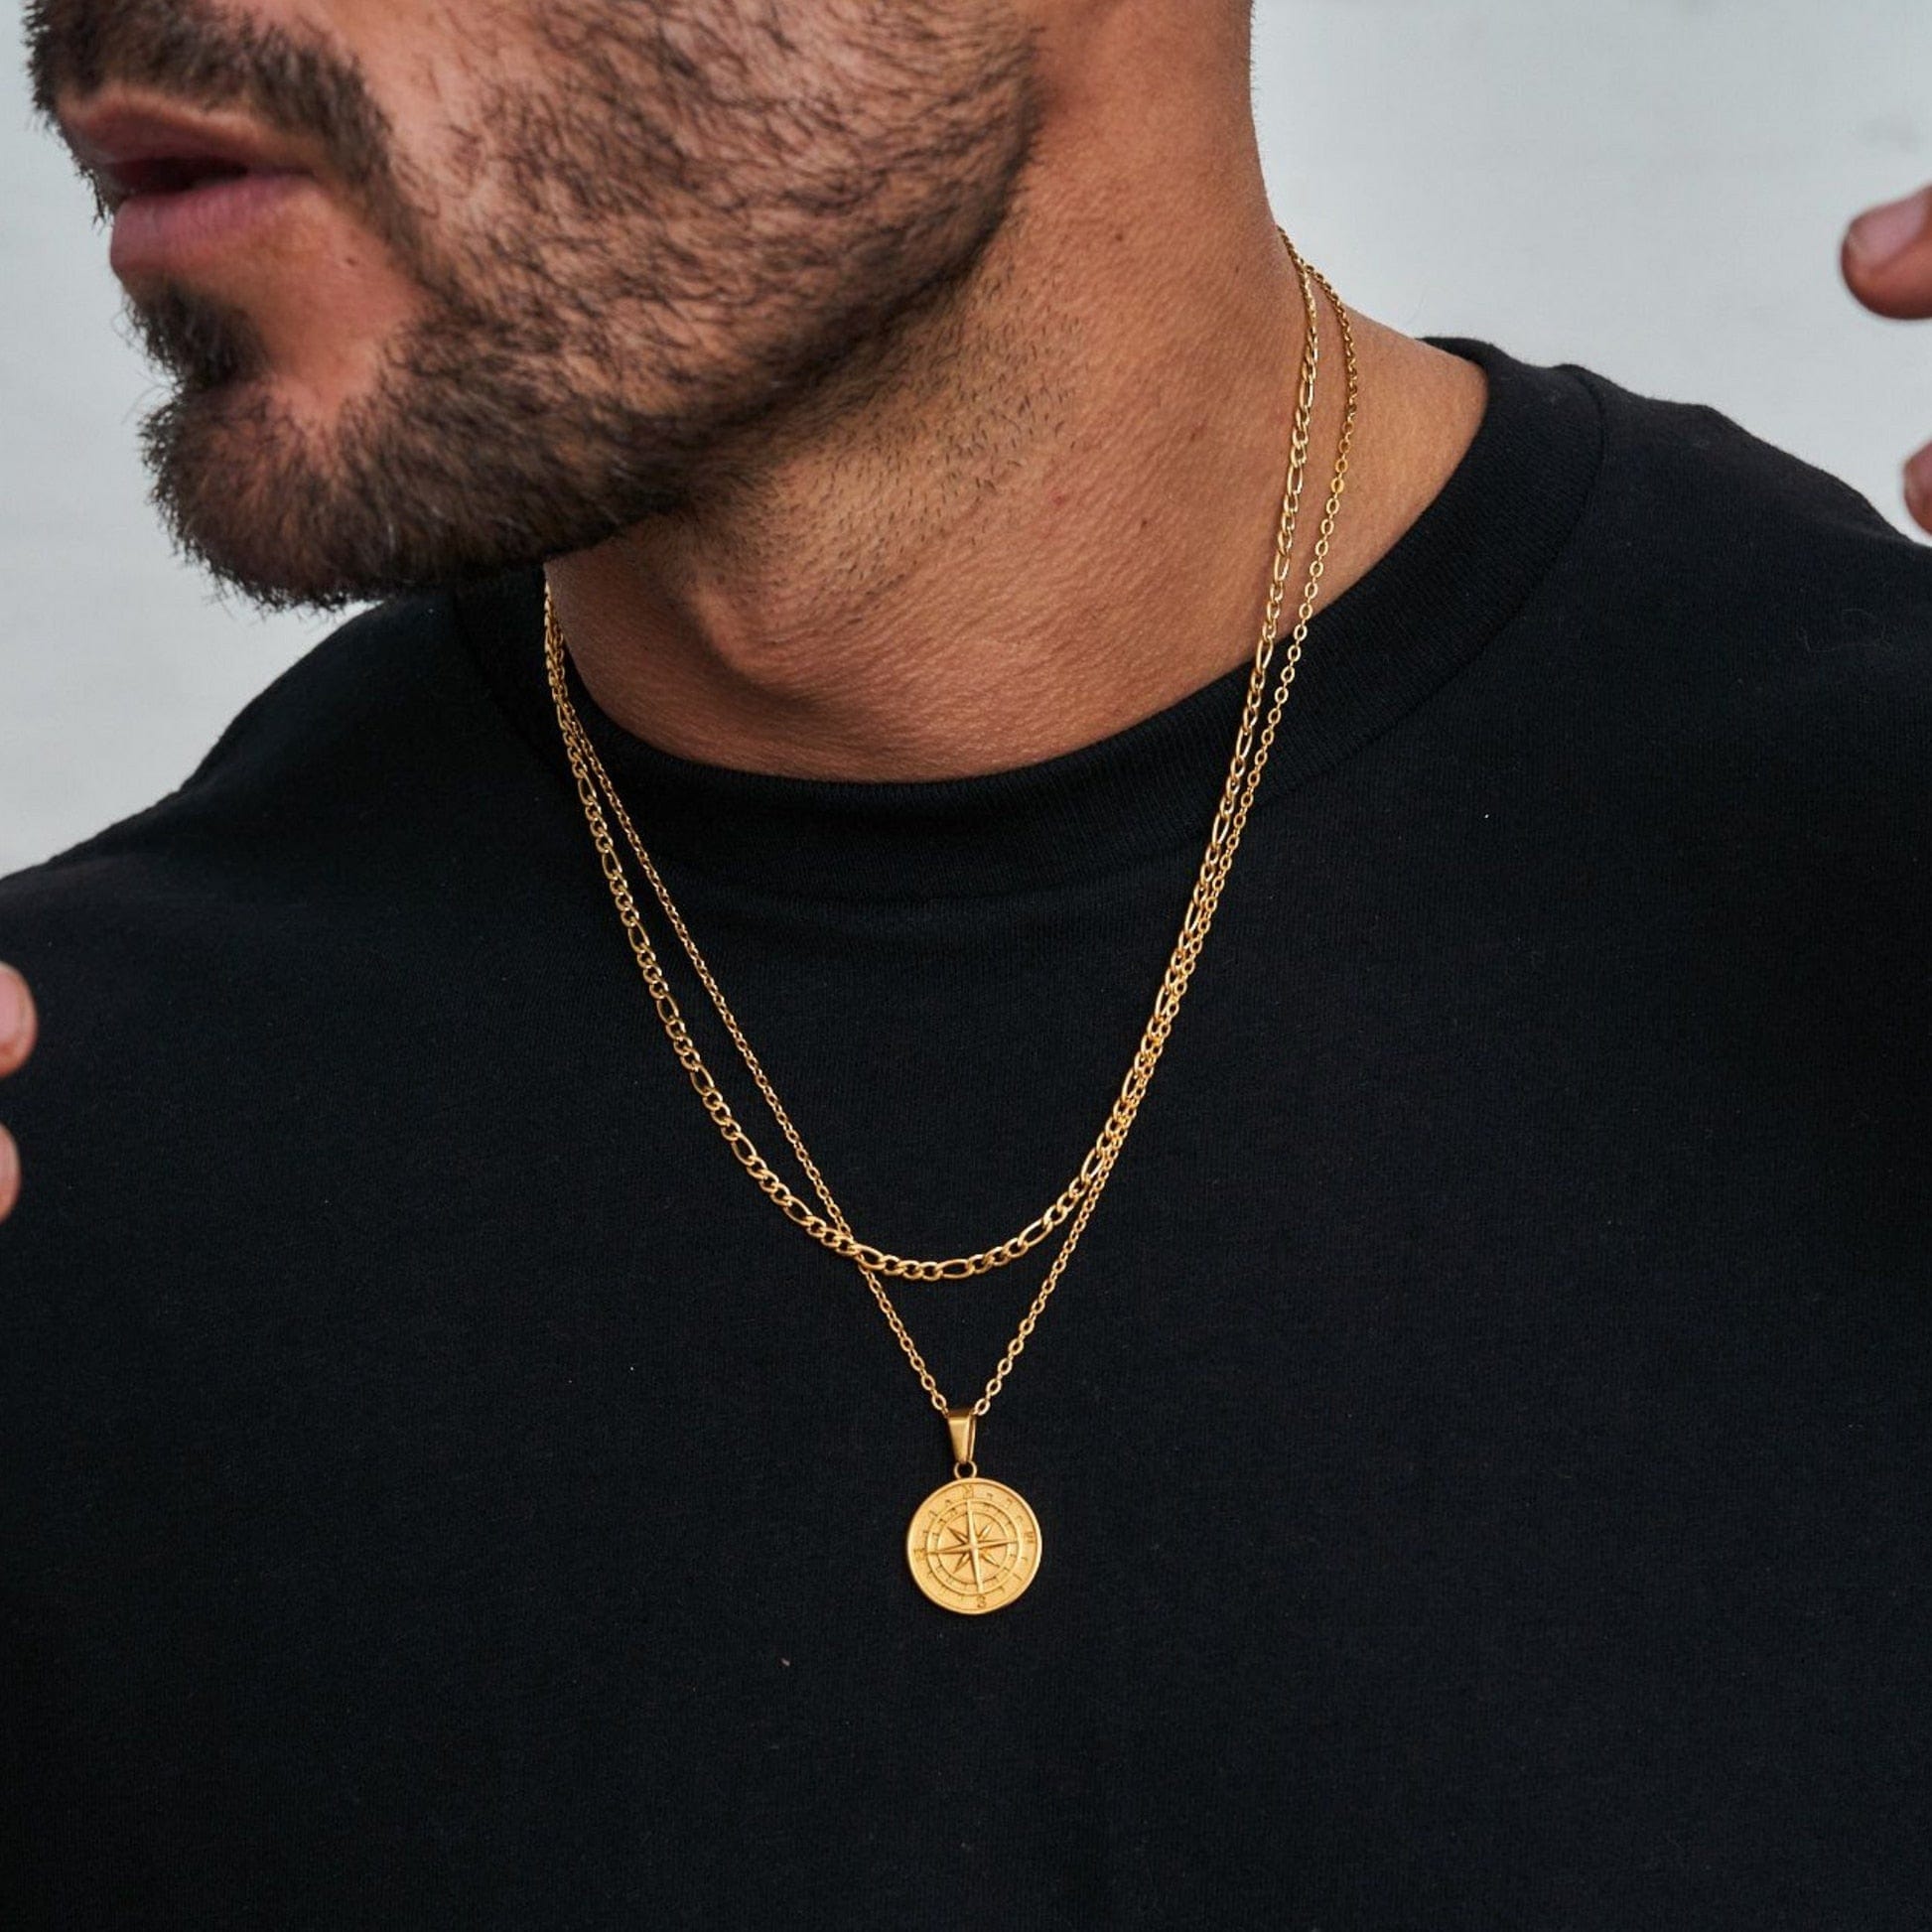 VVS Jewelry hip hop jewelry Gold Figaro Chain VVS Jewelry Compass Pendant Necklace